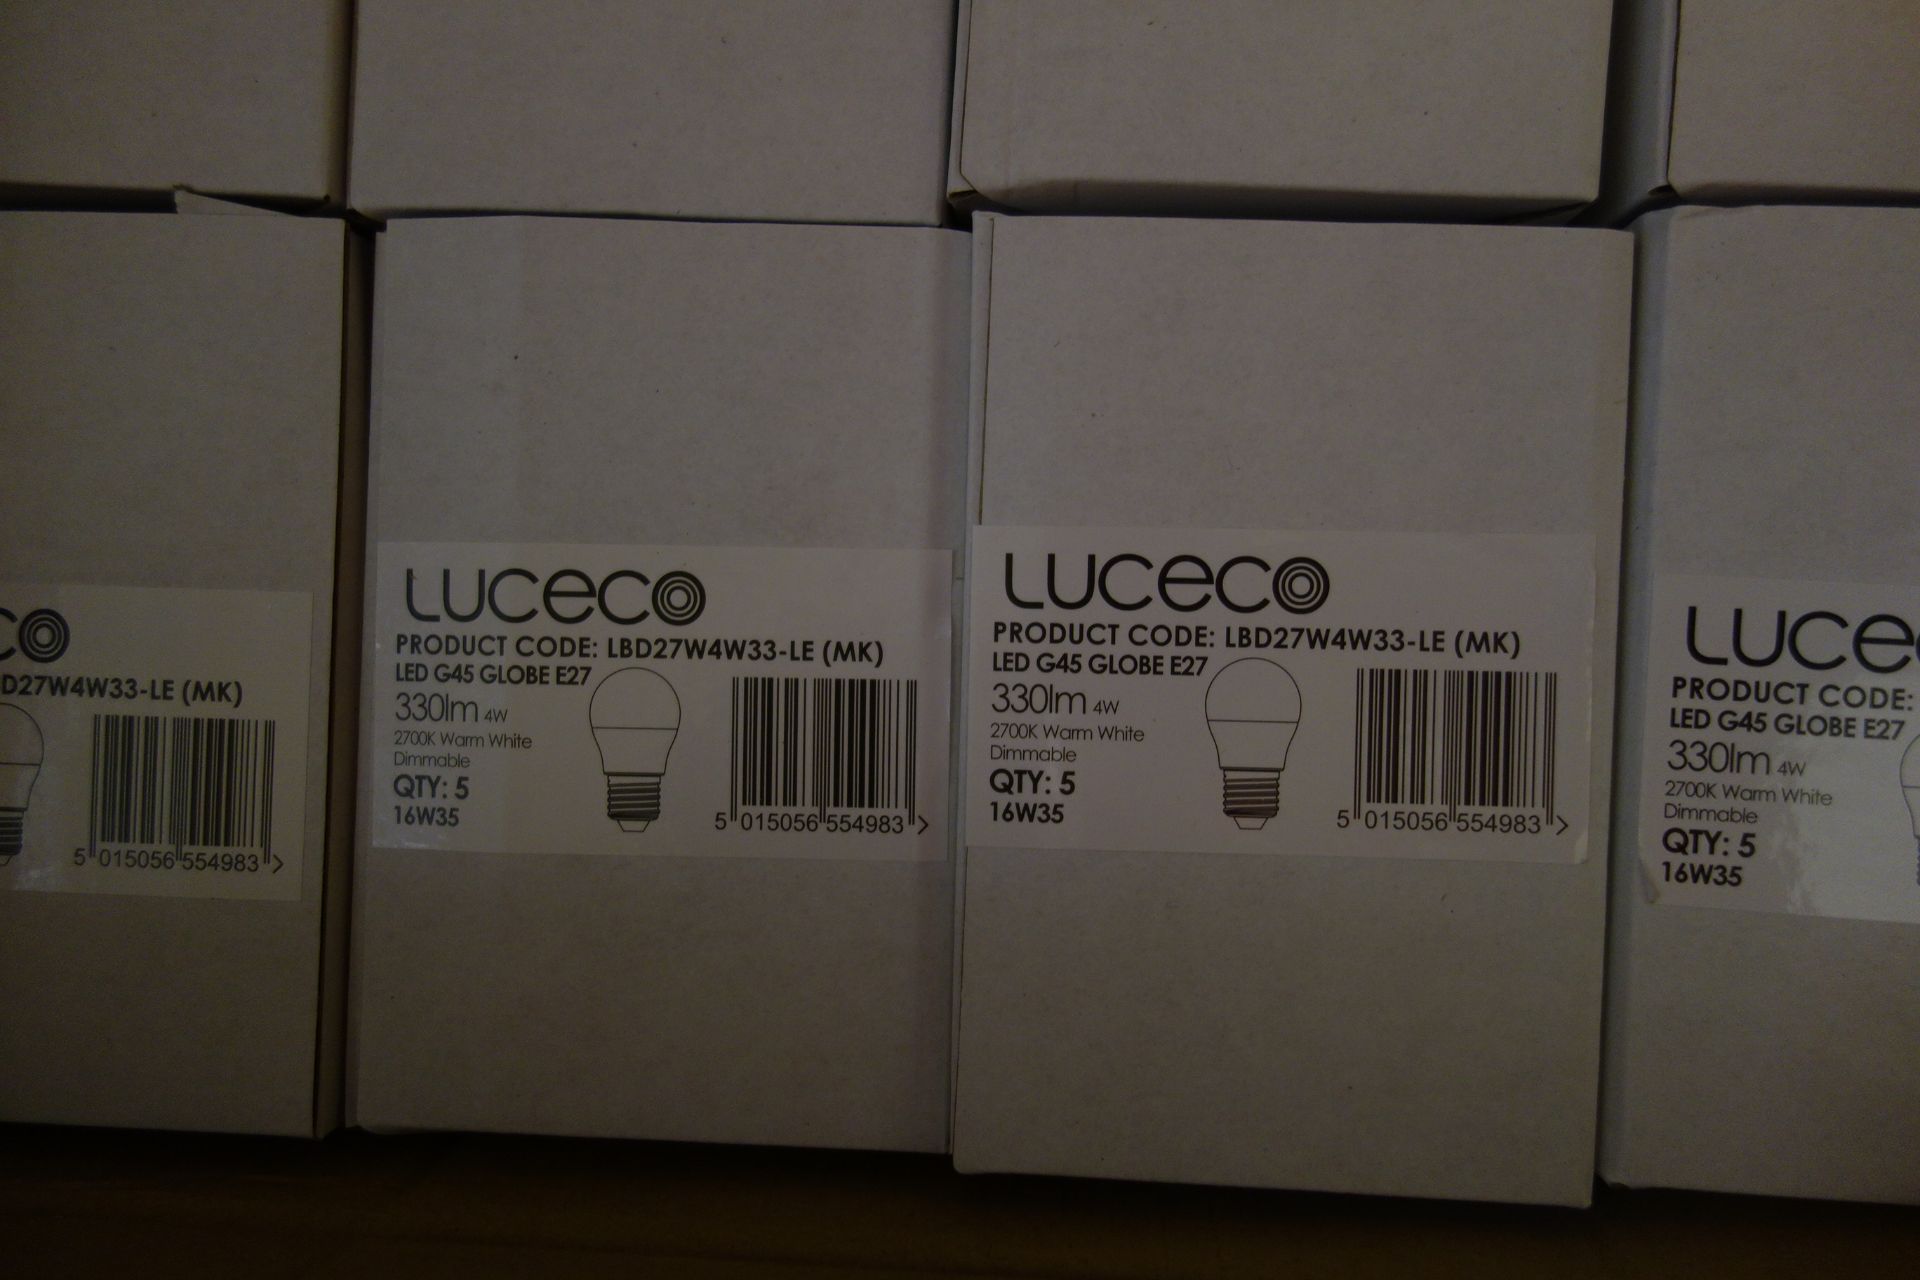 100 X Luceo LBD27W4W33-LE (MK) LED G45 Globe Lamps 330 Lumen 4W Dimmable E27 Fitting